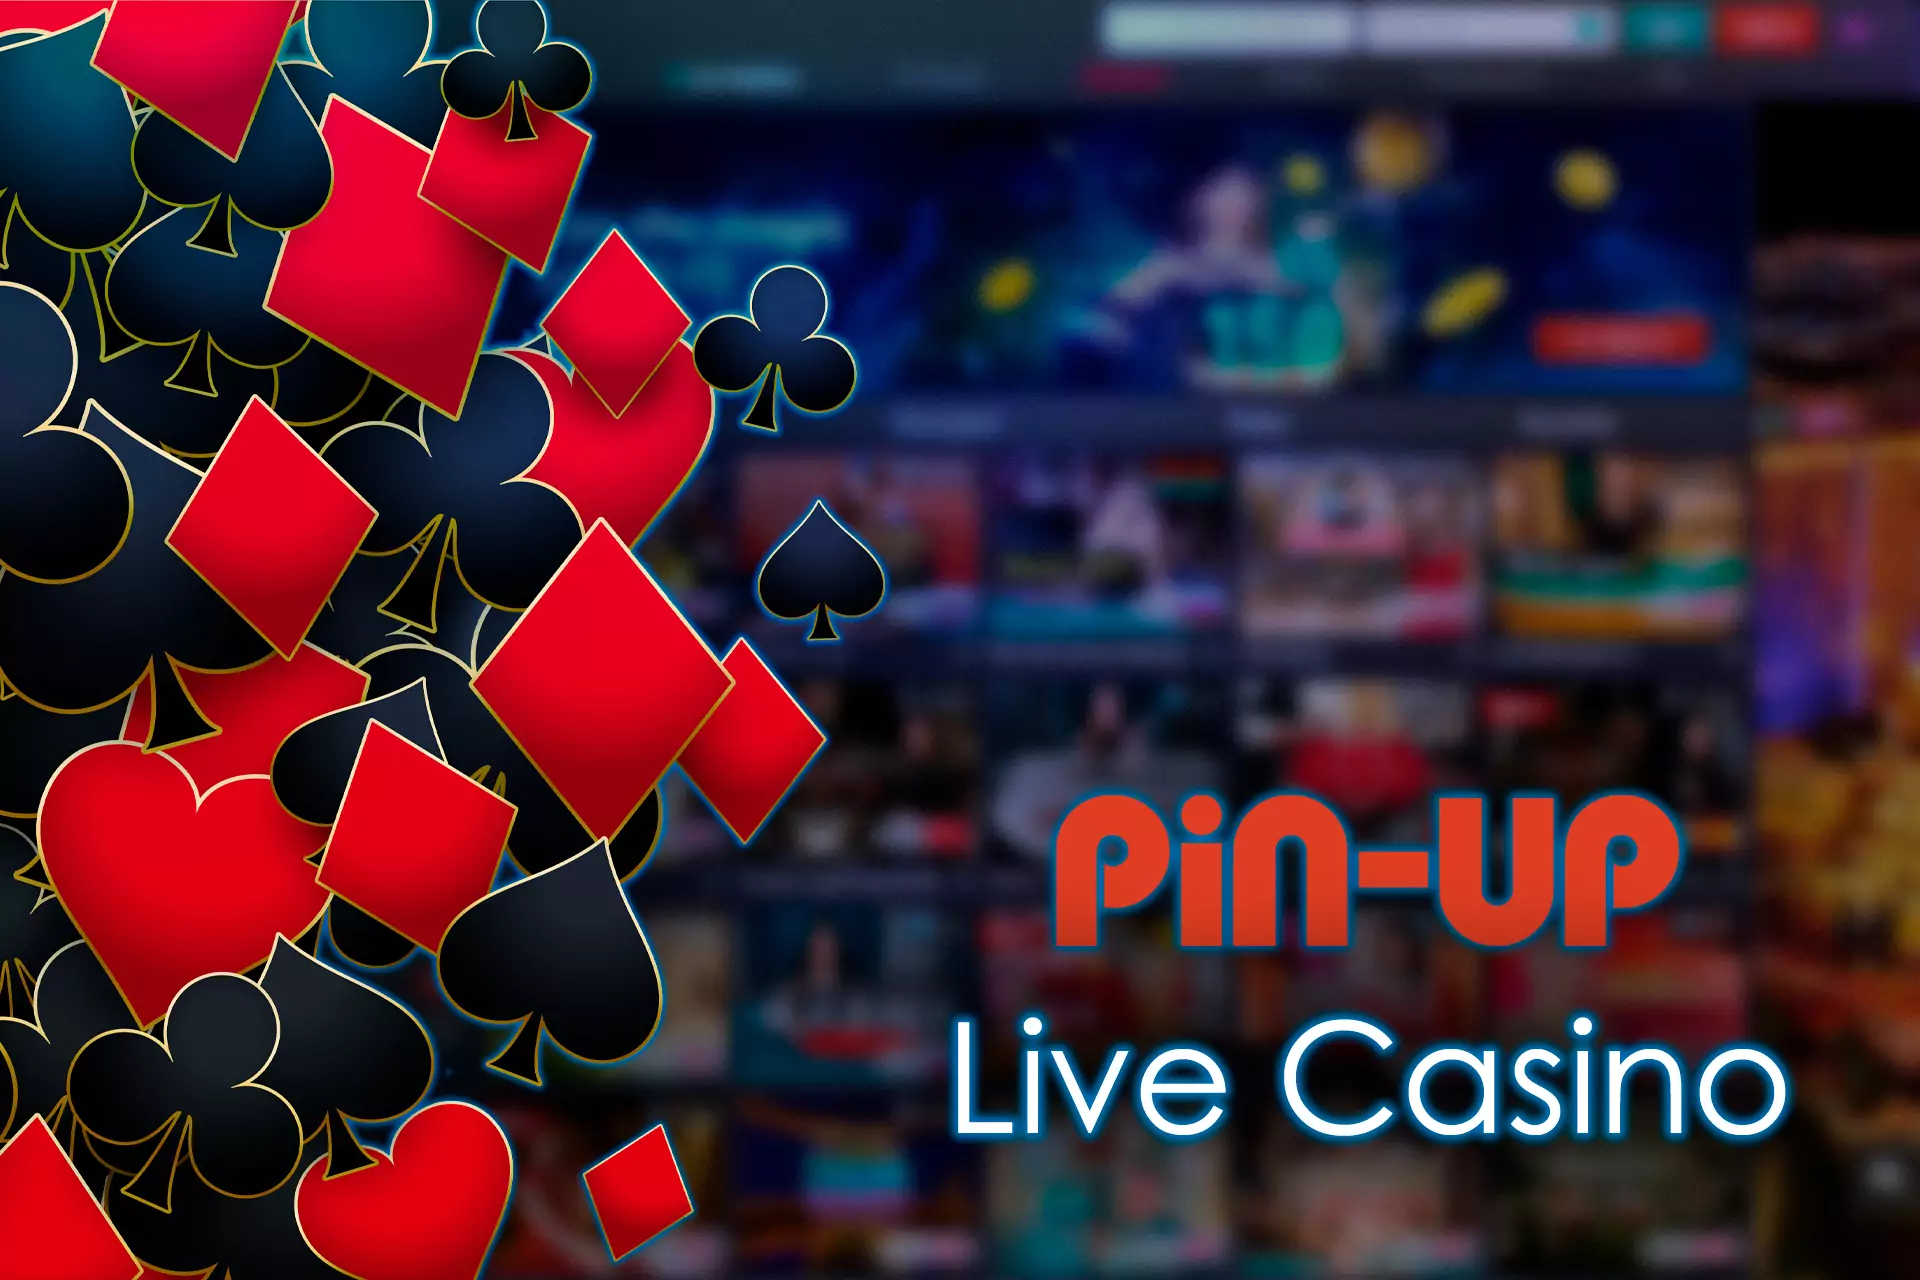 In the Live Casino section, you can play games online with a real dealer.